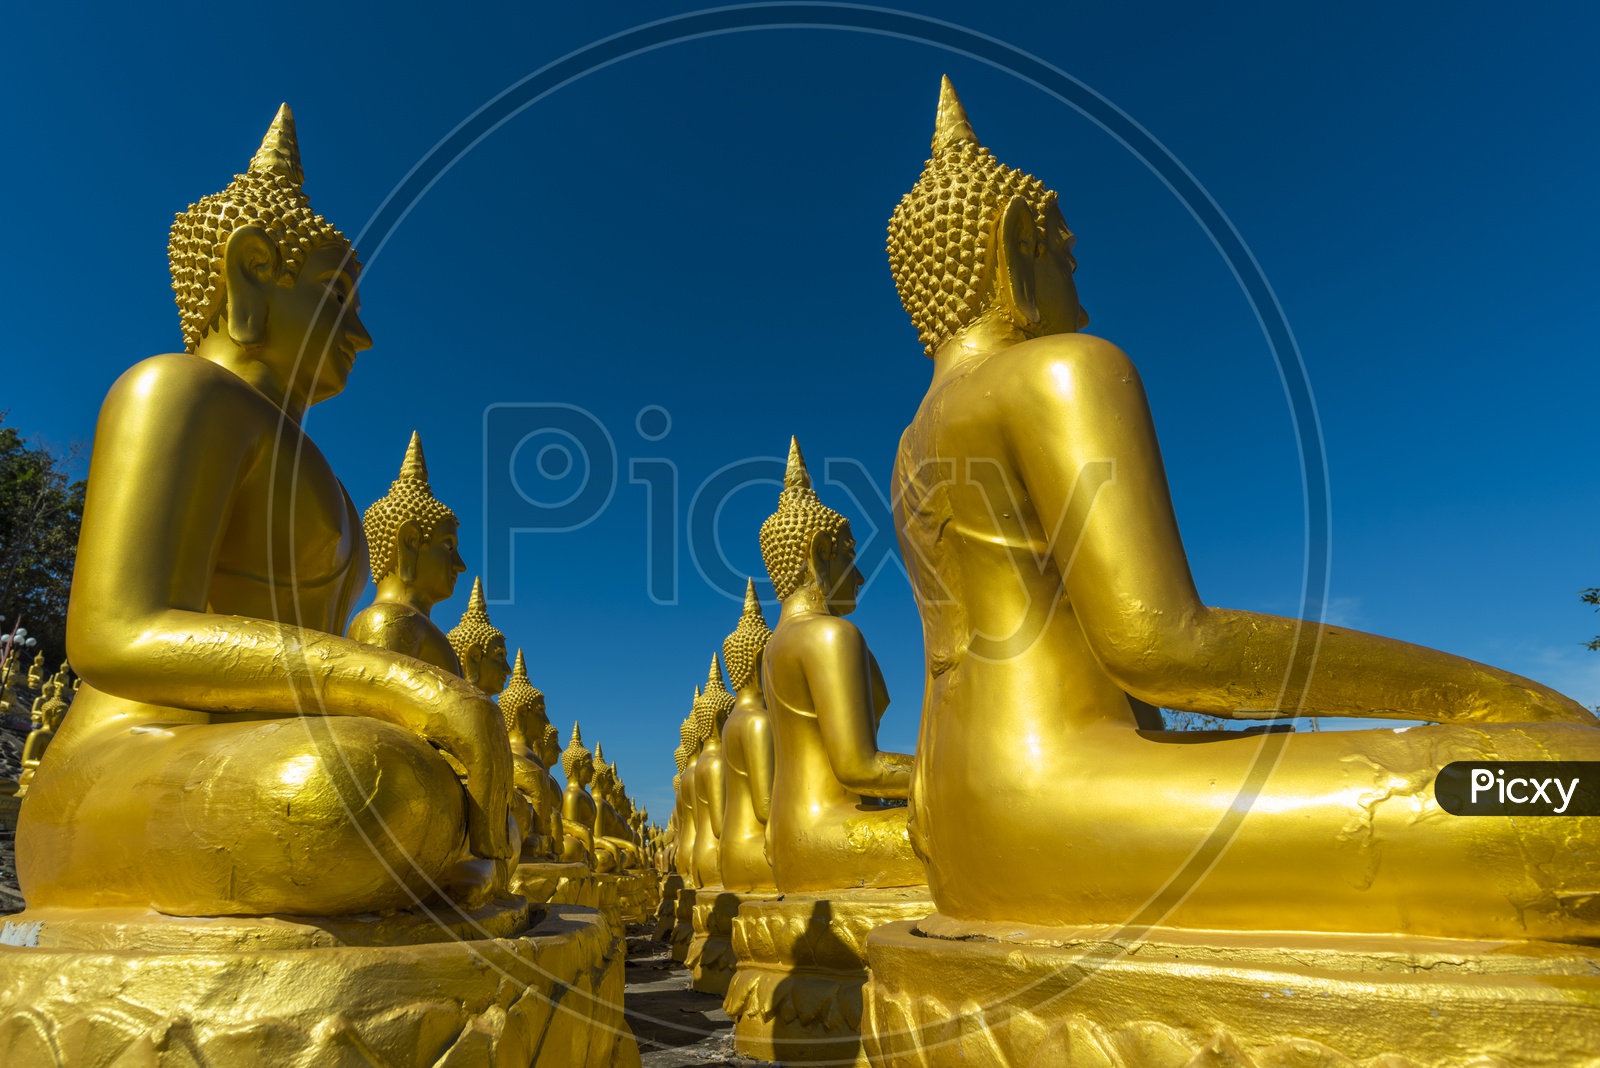 Big Buddha Statue in the temple of Mekong River